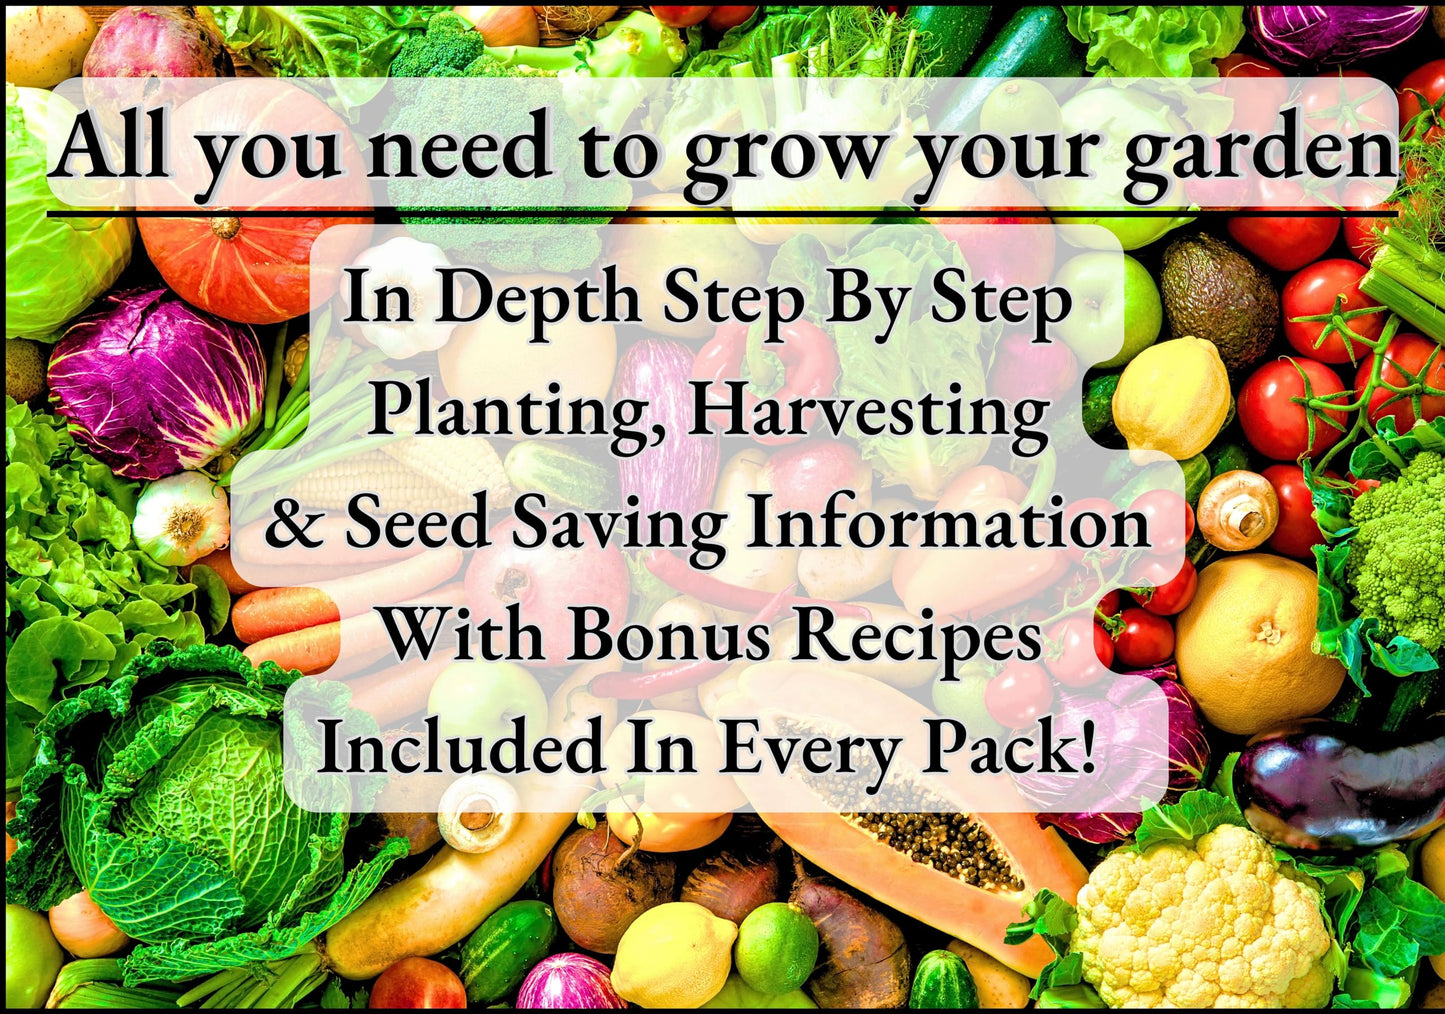 100 Seed Packets, 50 Different Vegetable & Fruit Seeds. 100,000 Individual Seeds for Long-Term Storage & Future Growing Seasons for Your Easy to Grow Garden. by B&KM Farms